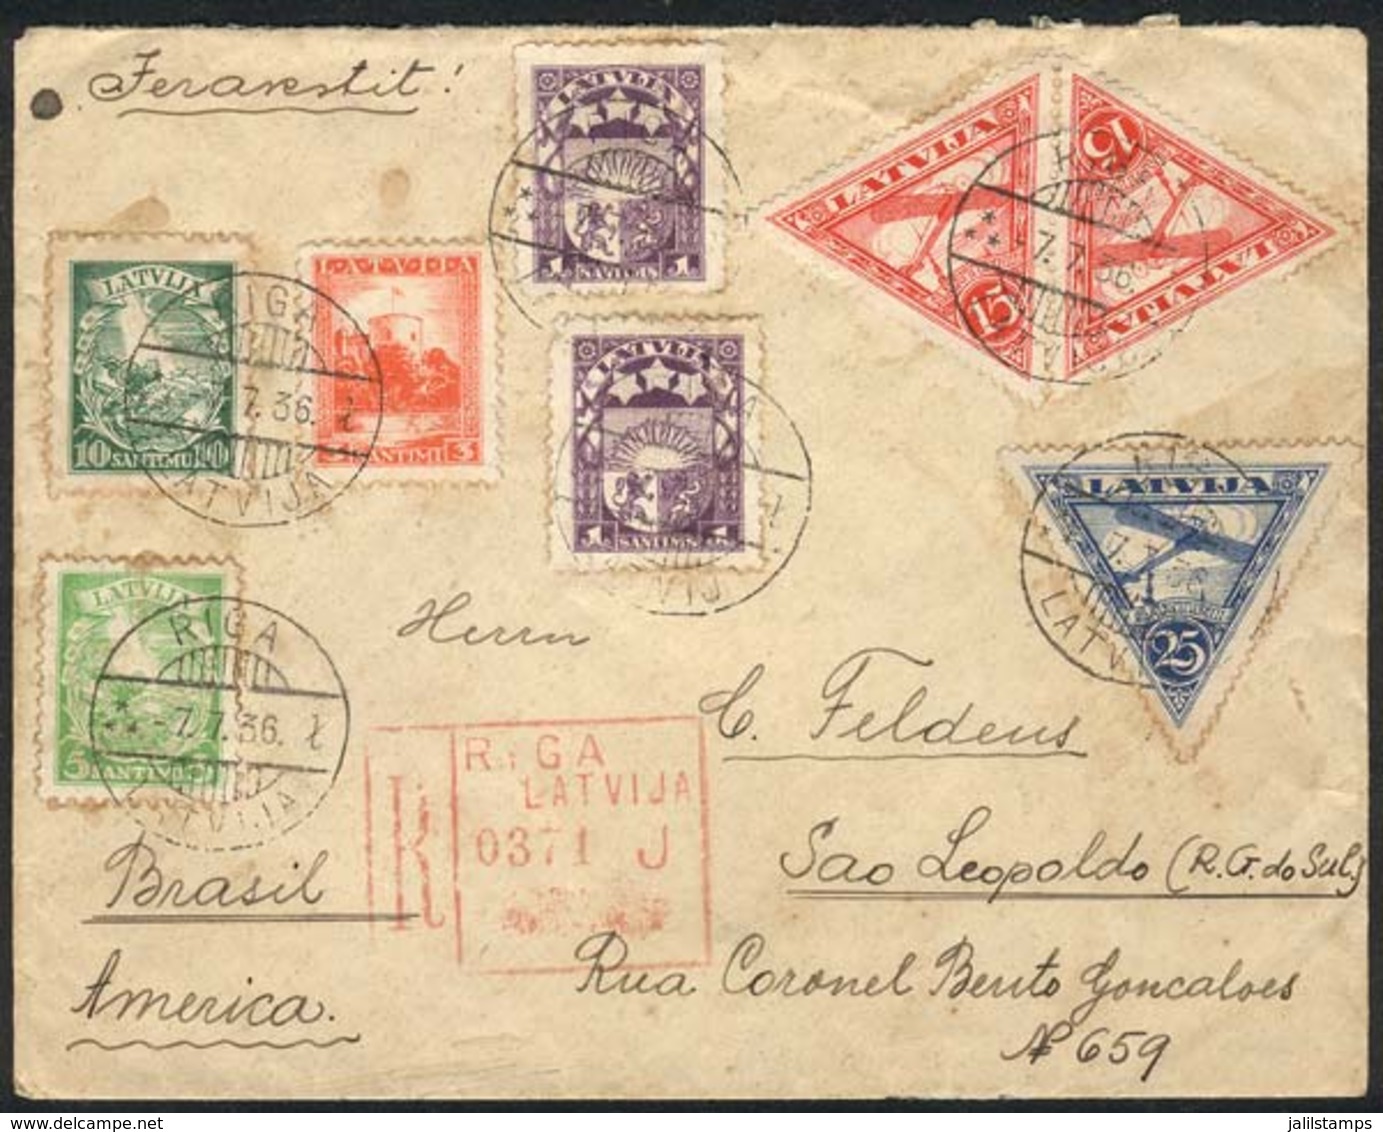 LATVIA: Airmail Cover Sent From Riga To Brazil On 7/JUL/1936 With Very Nice Postage And Beautiful Cinderella On Reverse! - Latvia